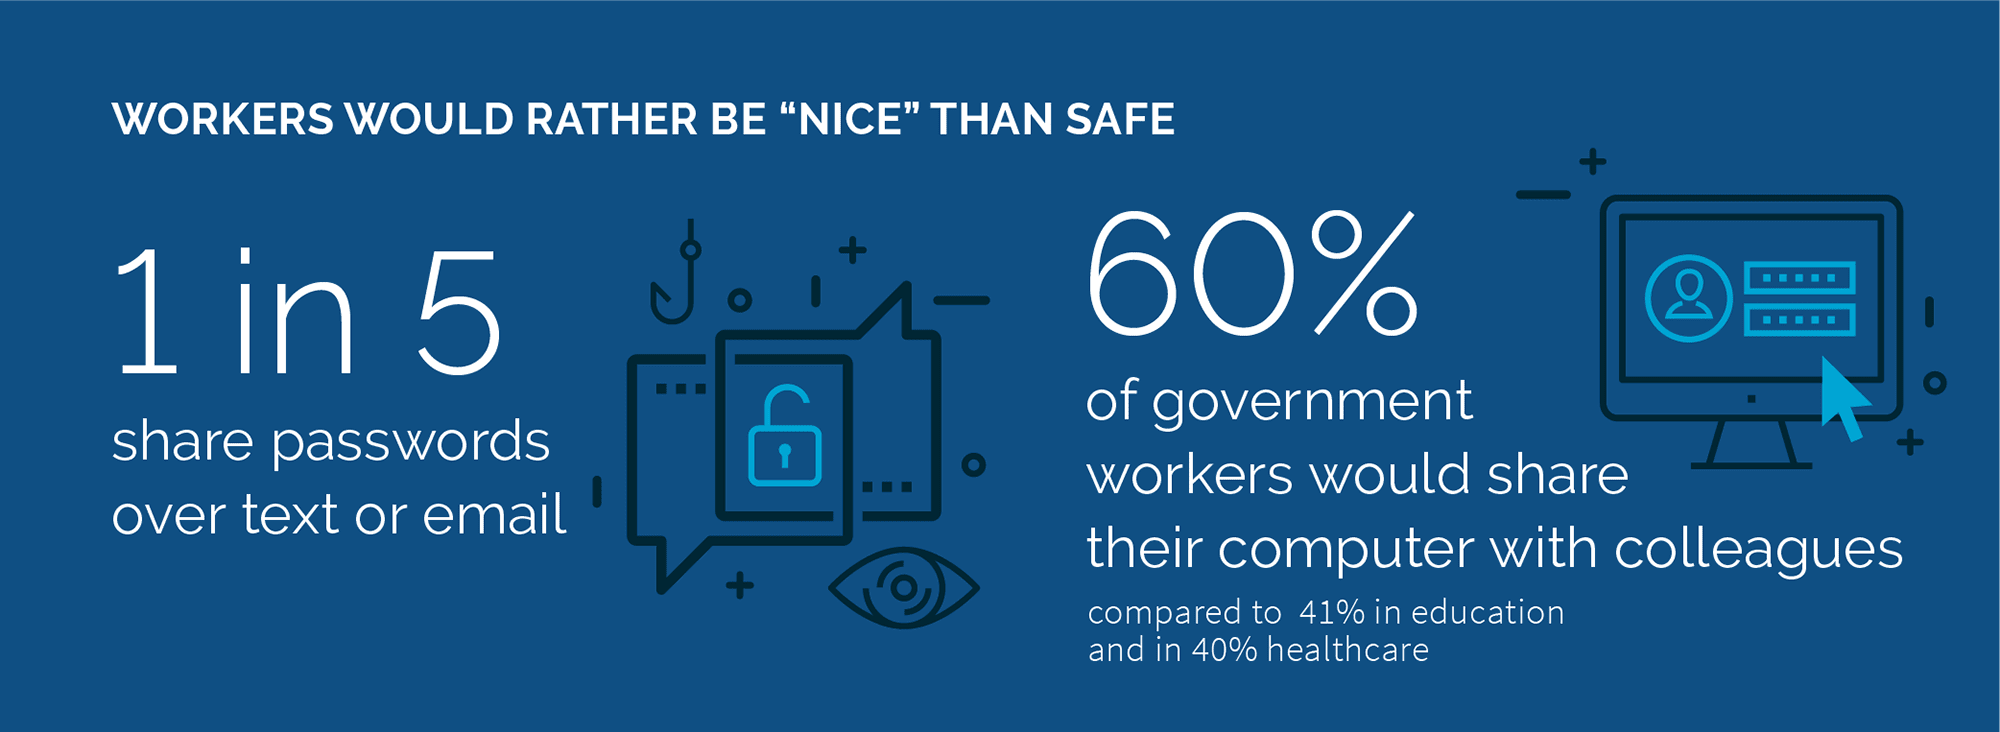 A data graphic showing that workers would rather be "nice" than safe when analyzing willingness to share passwords or personal computers.